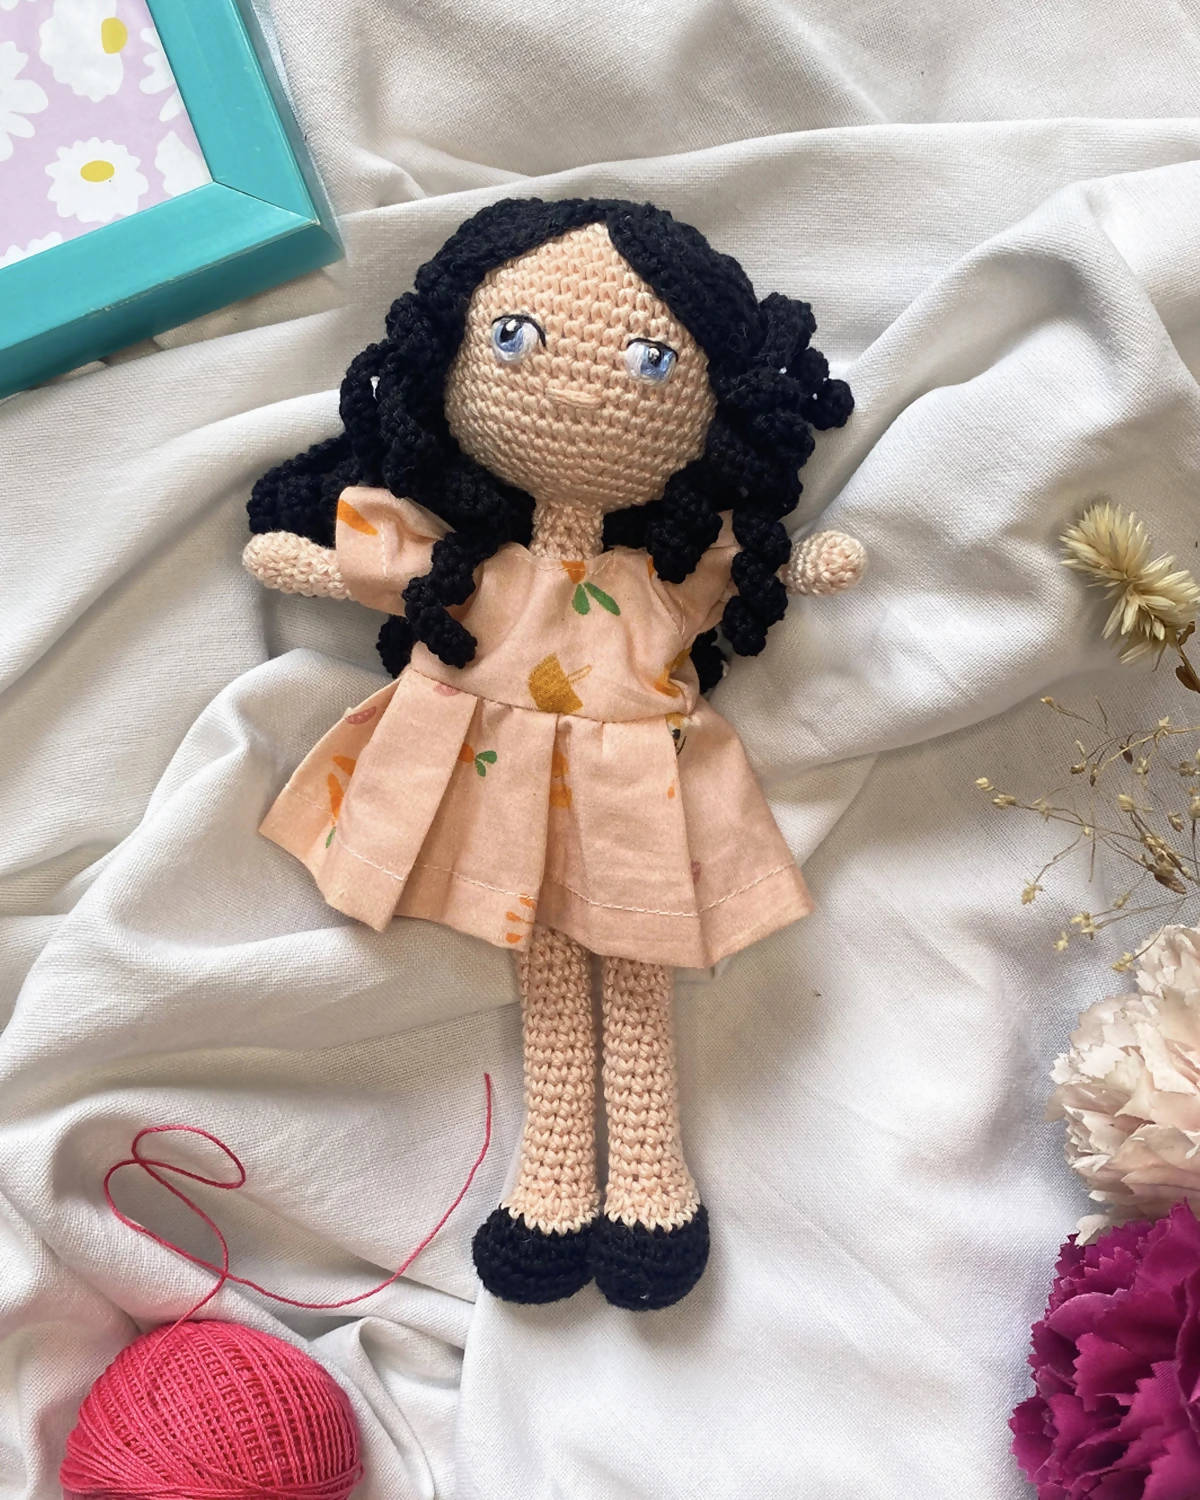 Lolo Snuggles' Upcycled Crochet Doll